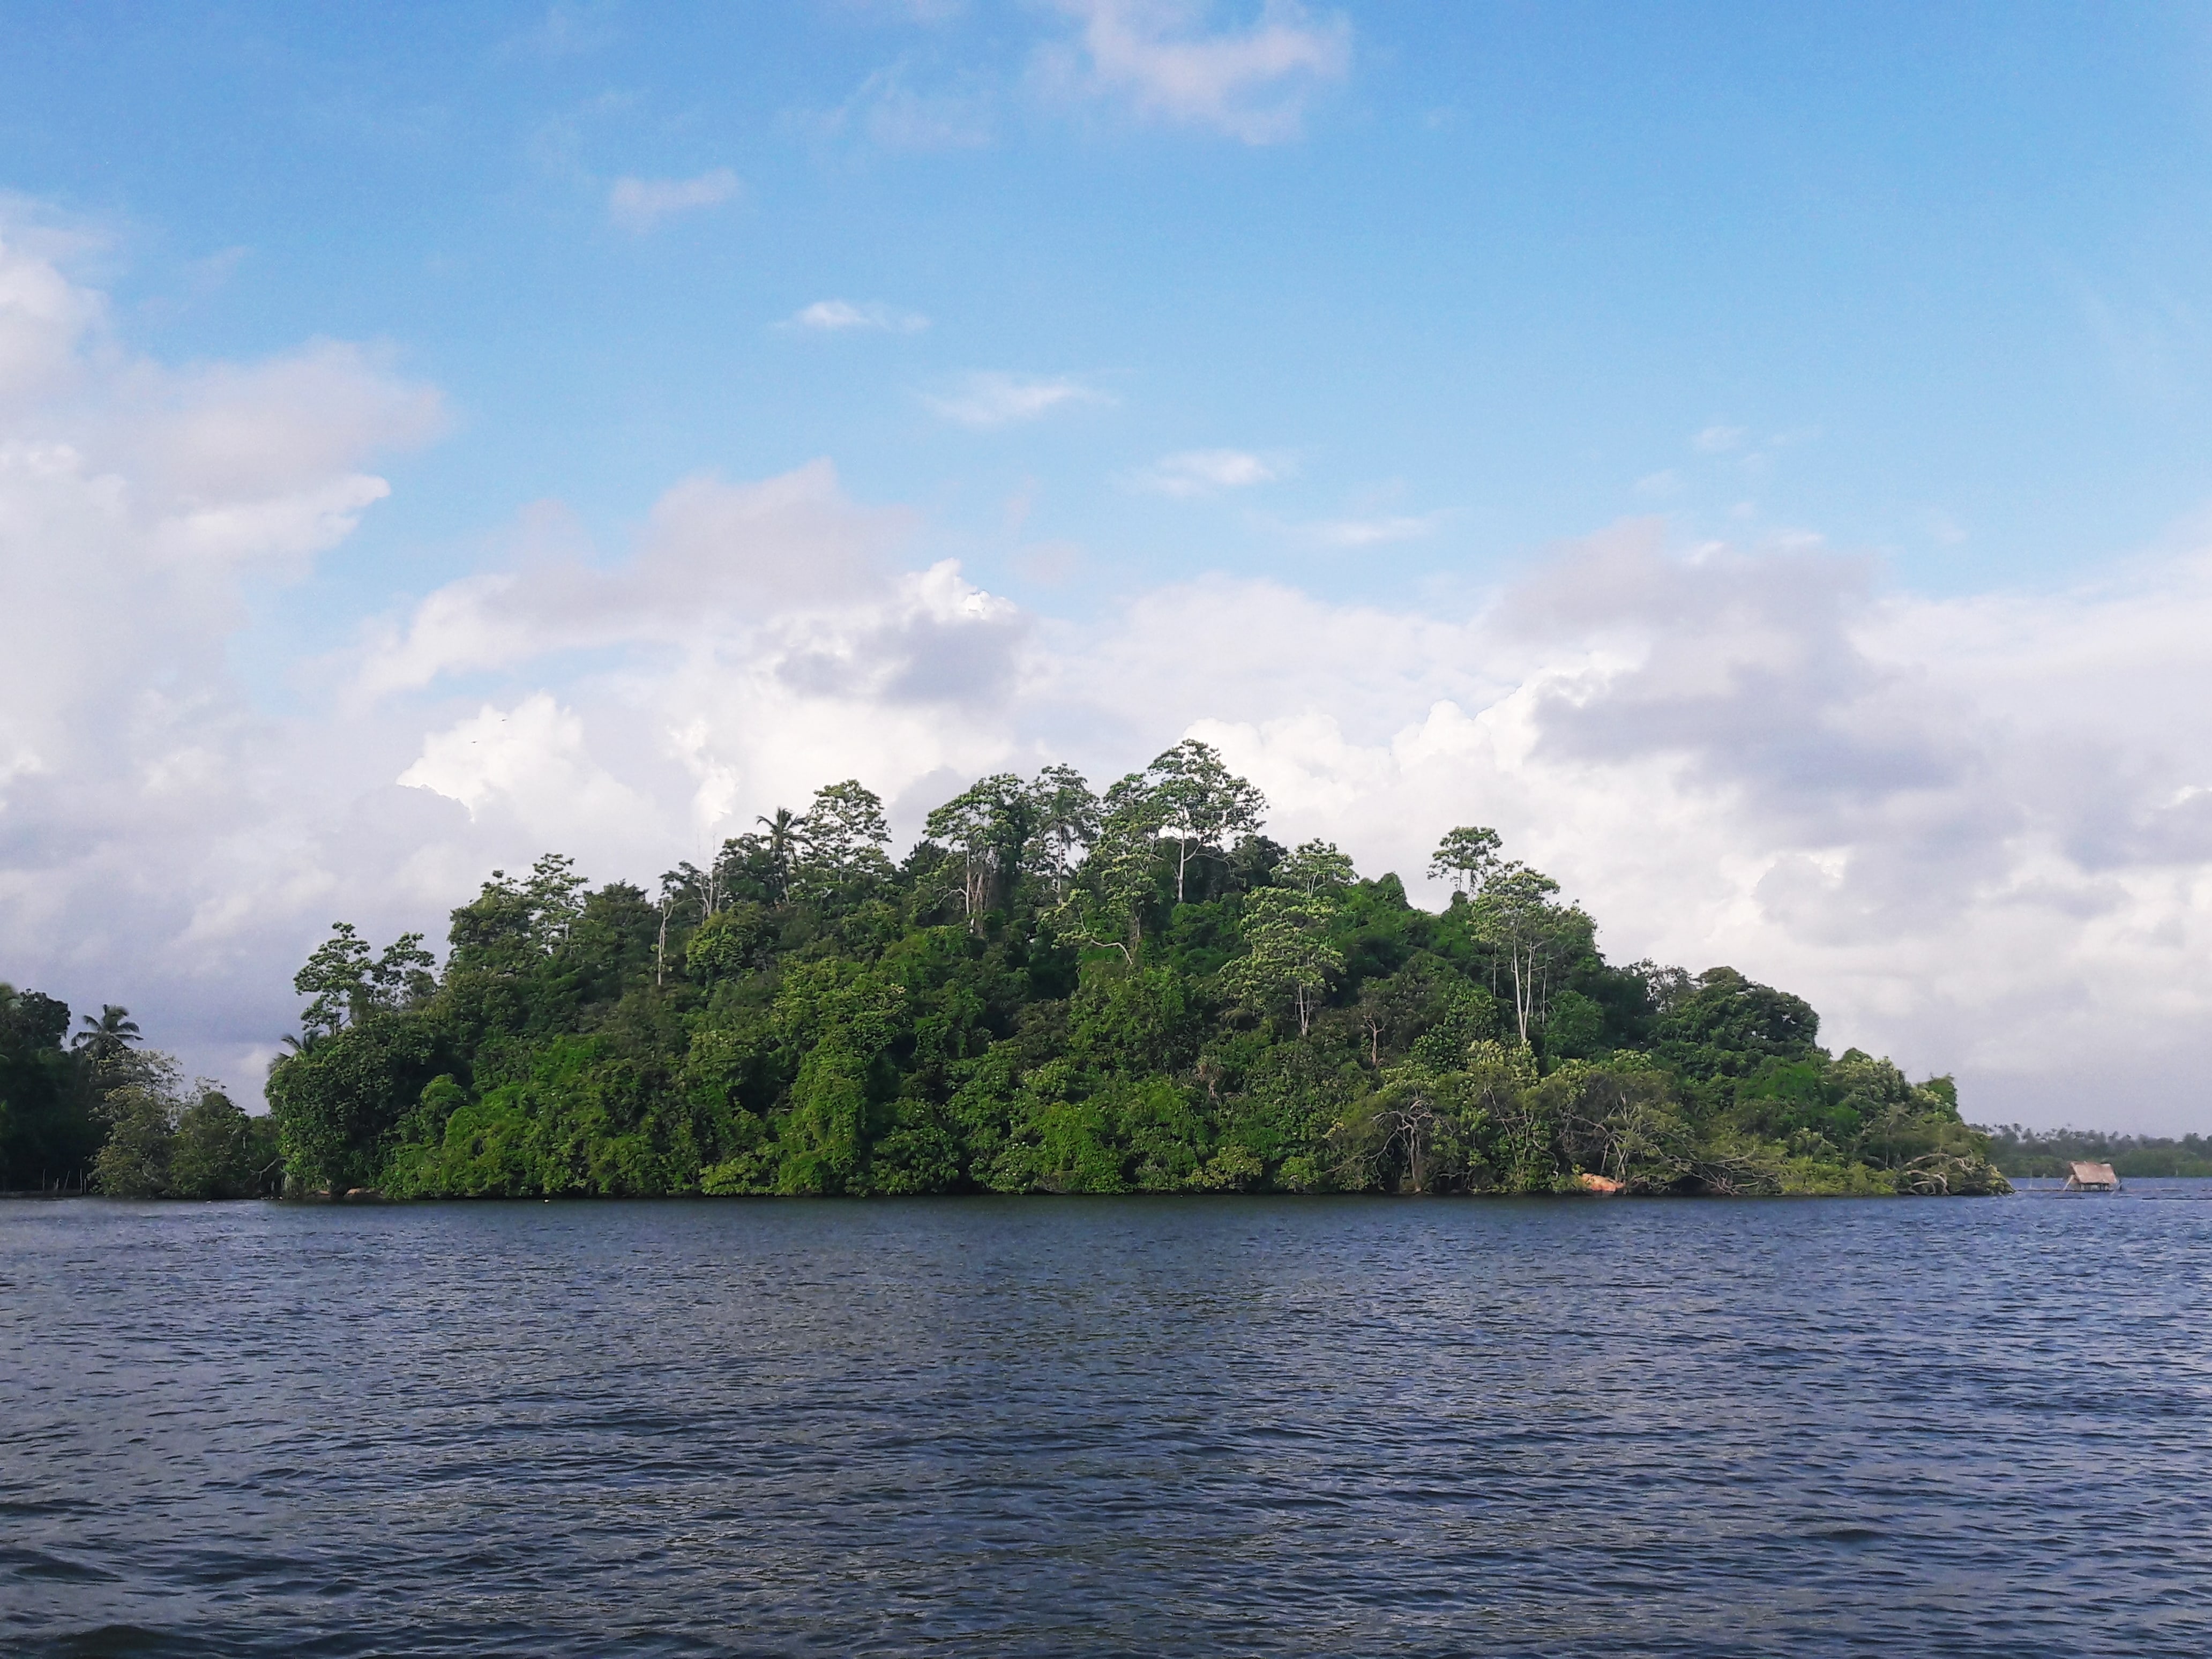 One of the many islands in the lagoon as seen during the boat ride